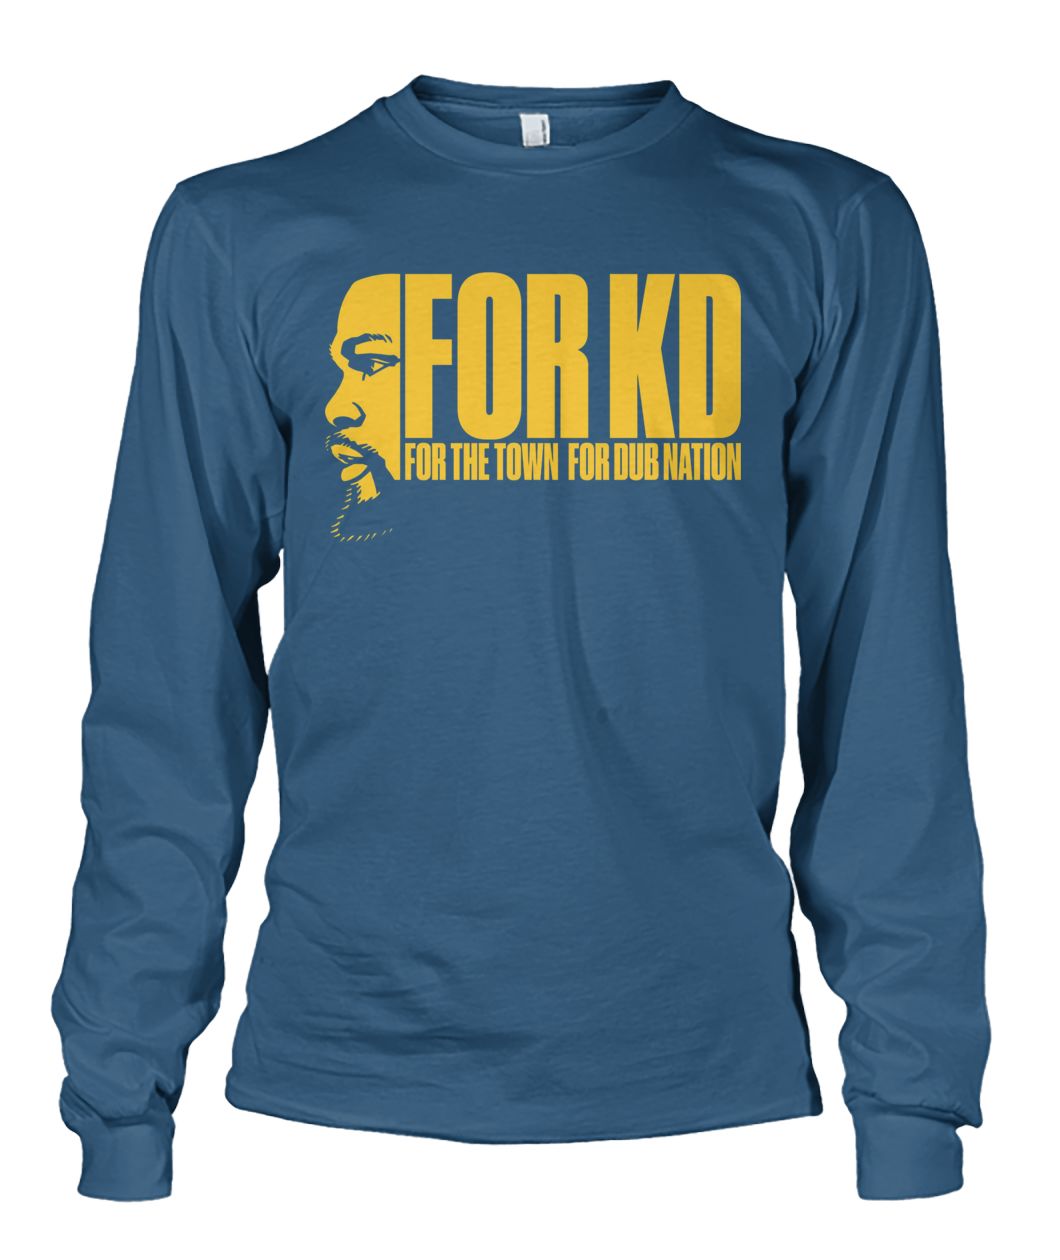 For KD for the town for dub nation unisex long sleeve